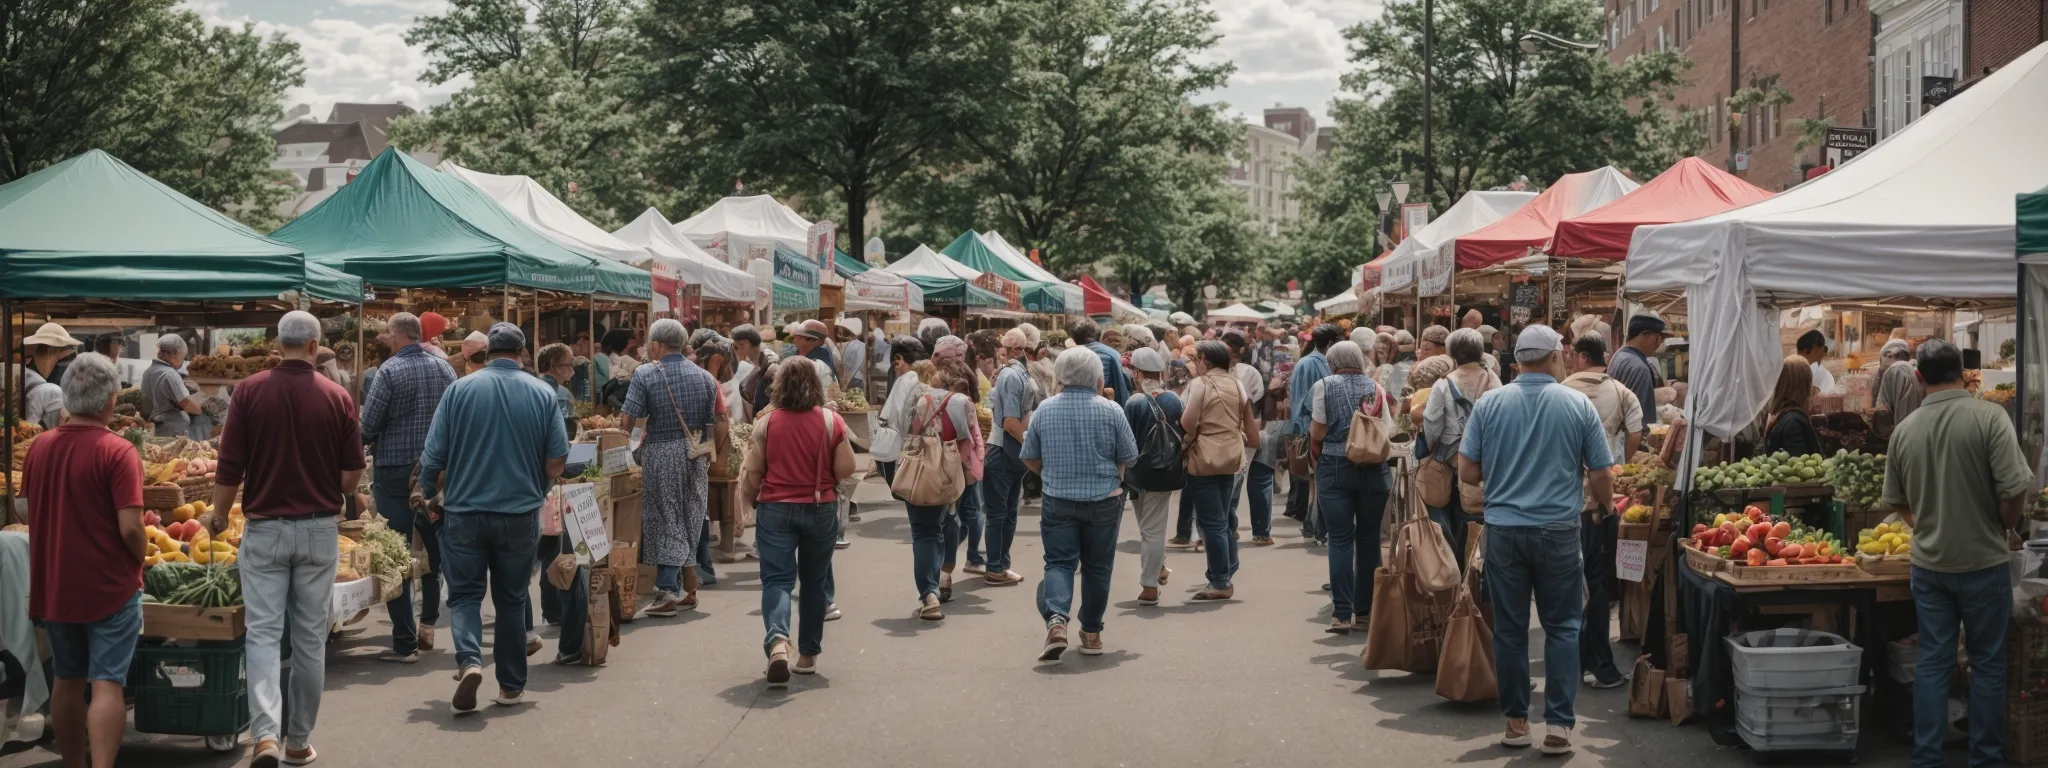 a bustling farmers market scene in harrisburg with various local business stalls and a community engaging in lively interactions.